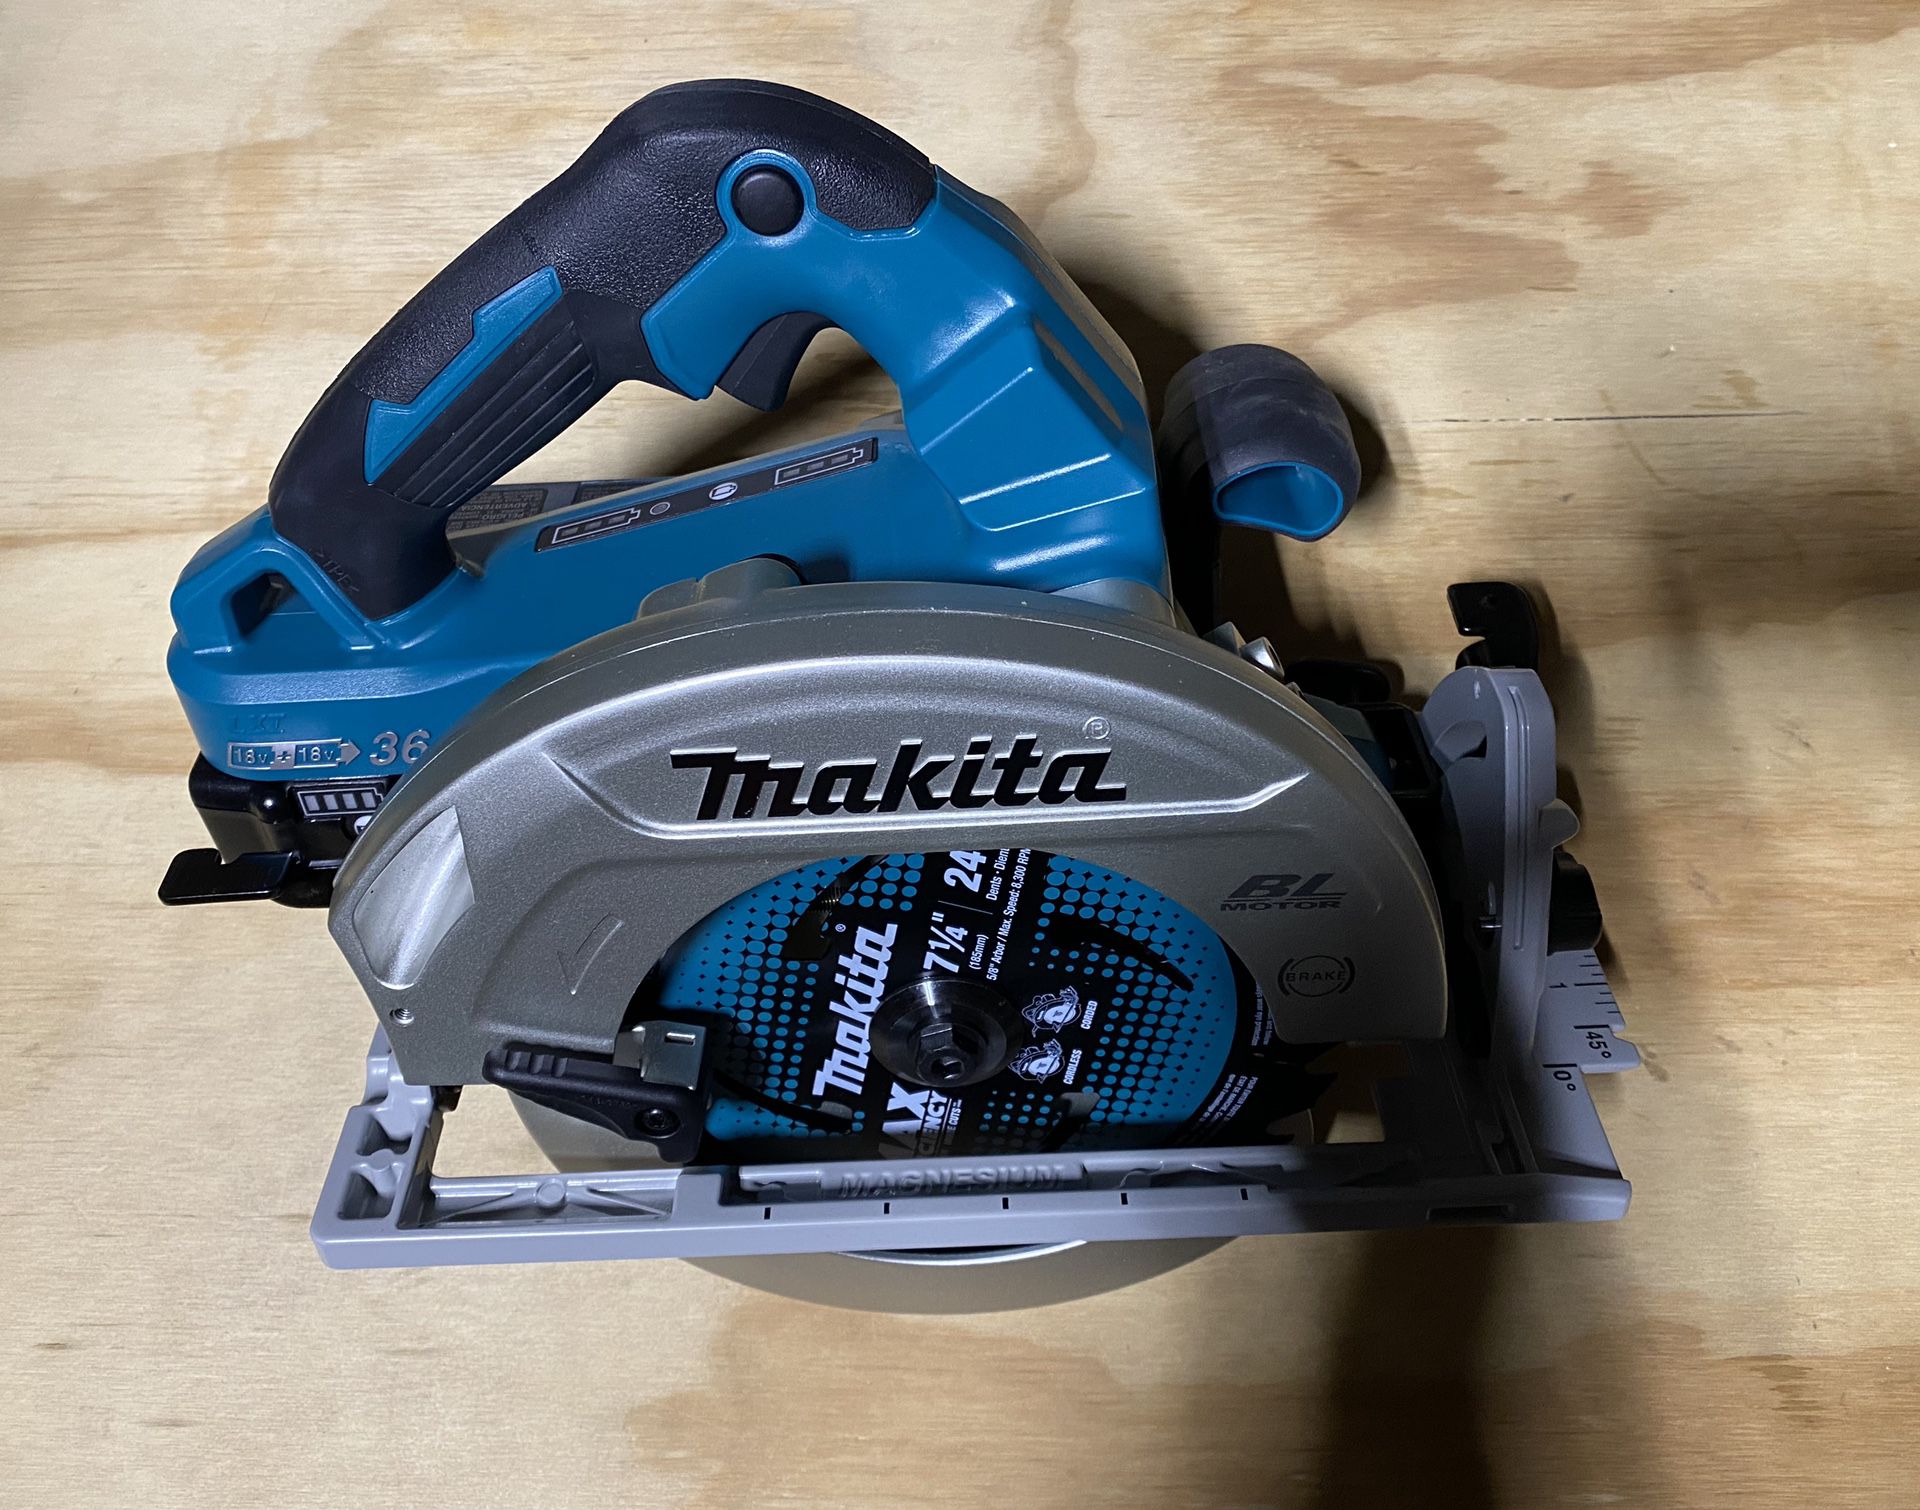 Makita 18-Volt X2 LXT Lithium-Ion (36-Volt) Brushless Cordless 7-1/4 in. Circular Saw (Tool Only)